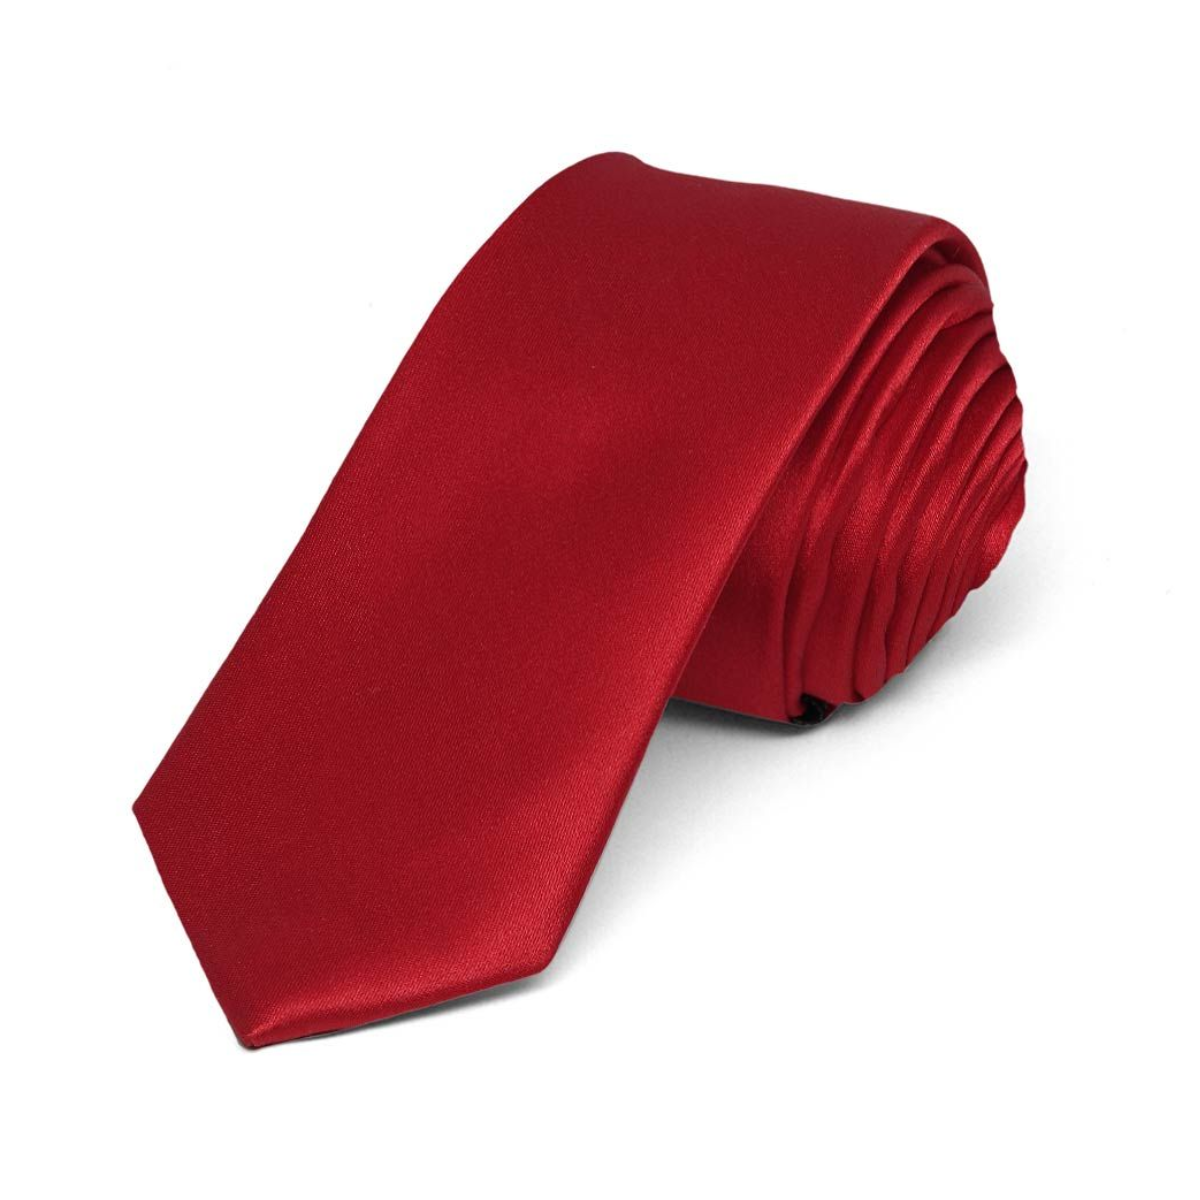 40. Surprise Him with a Personalized Silk Tie in His Favorite Color - Perfect Anniversary Gift